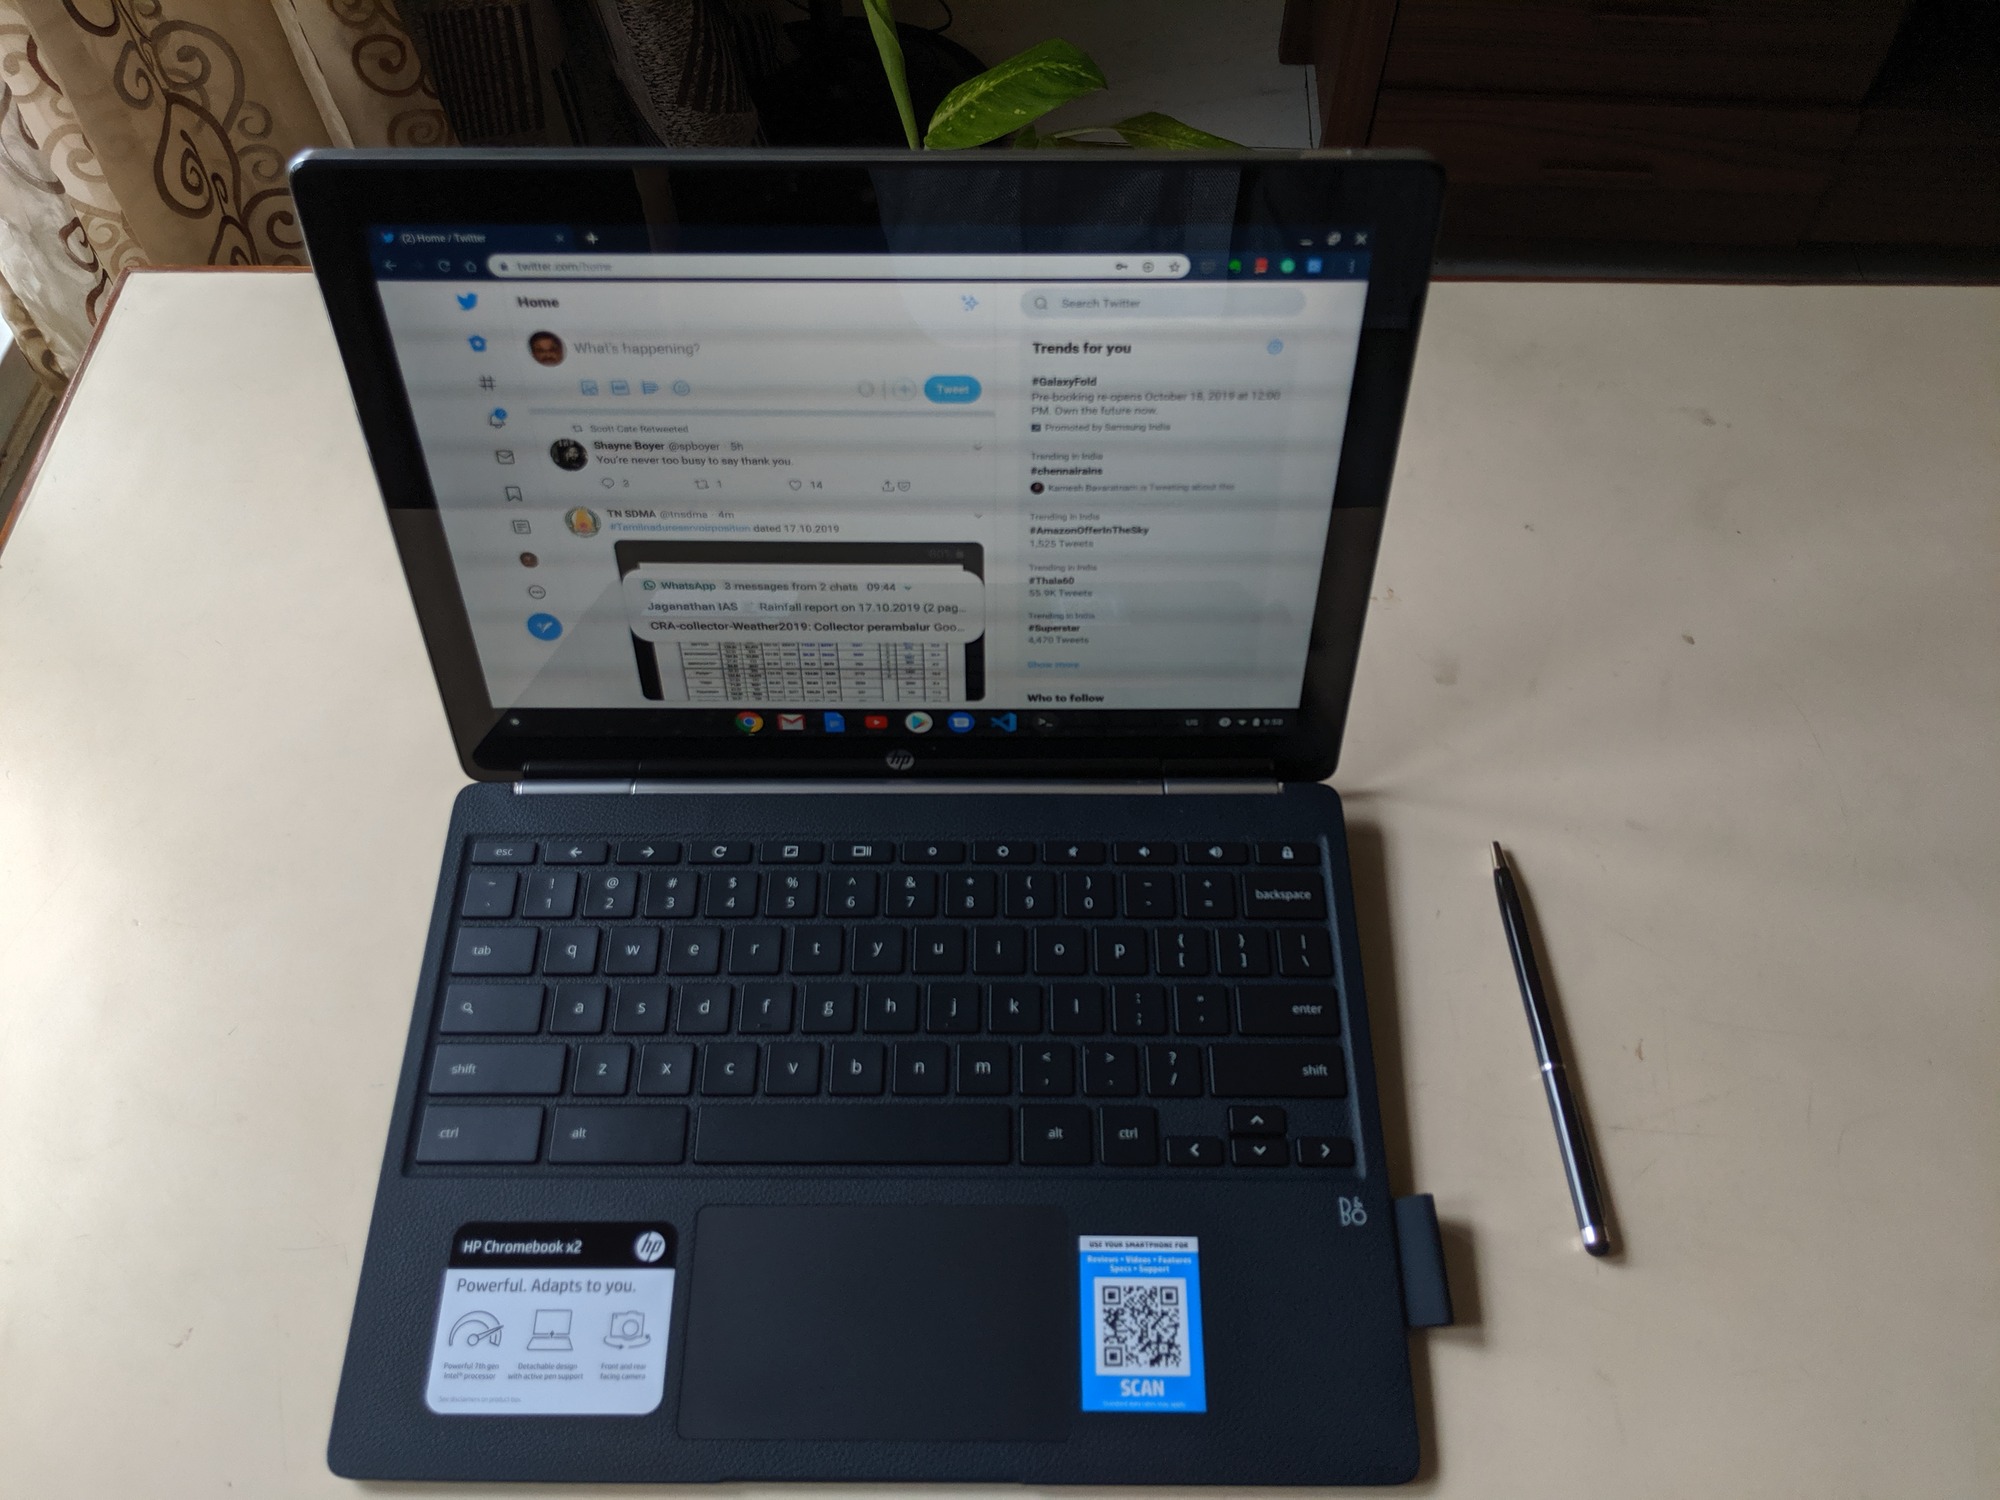 HP Chromebook x2 - Laptop mode with a keyboard